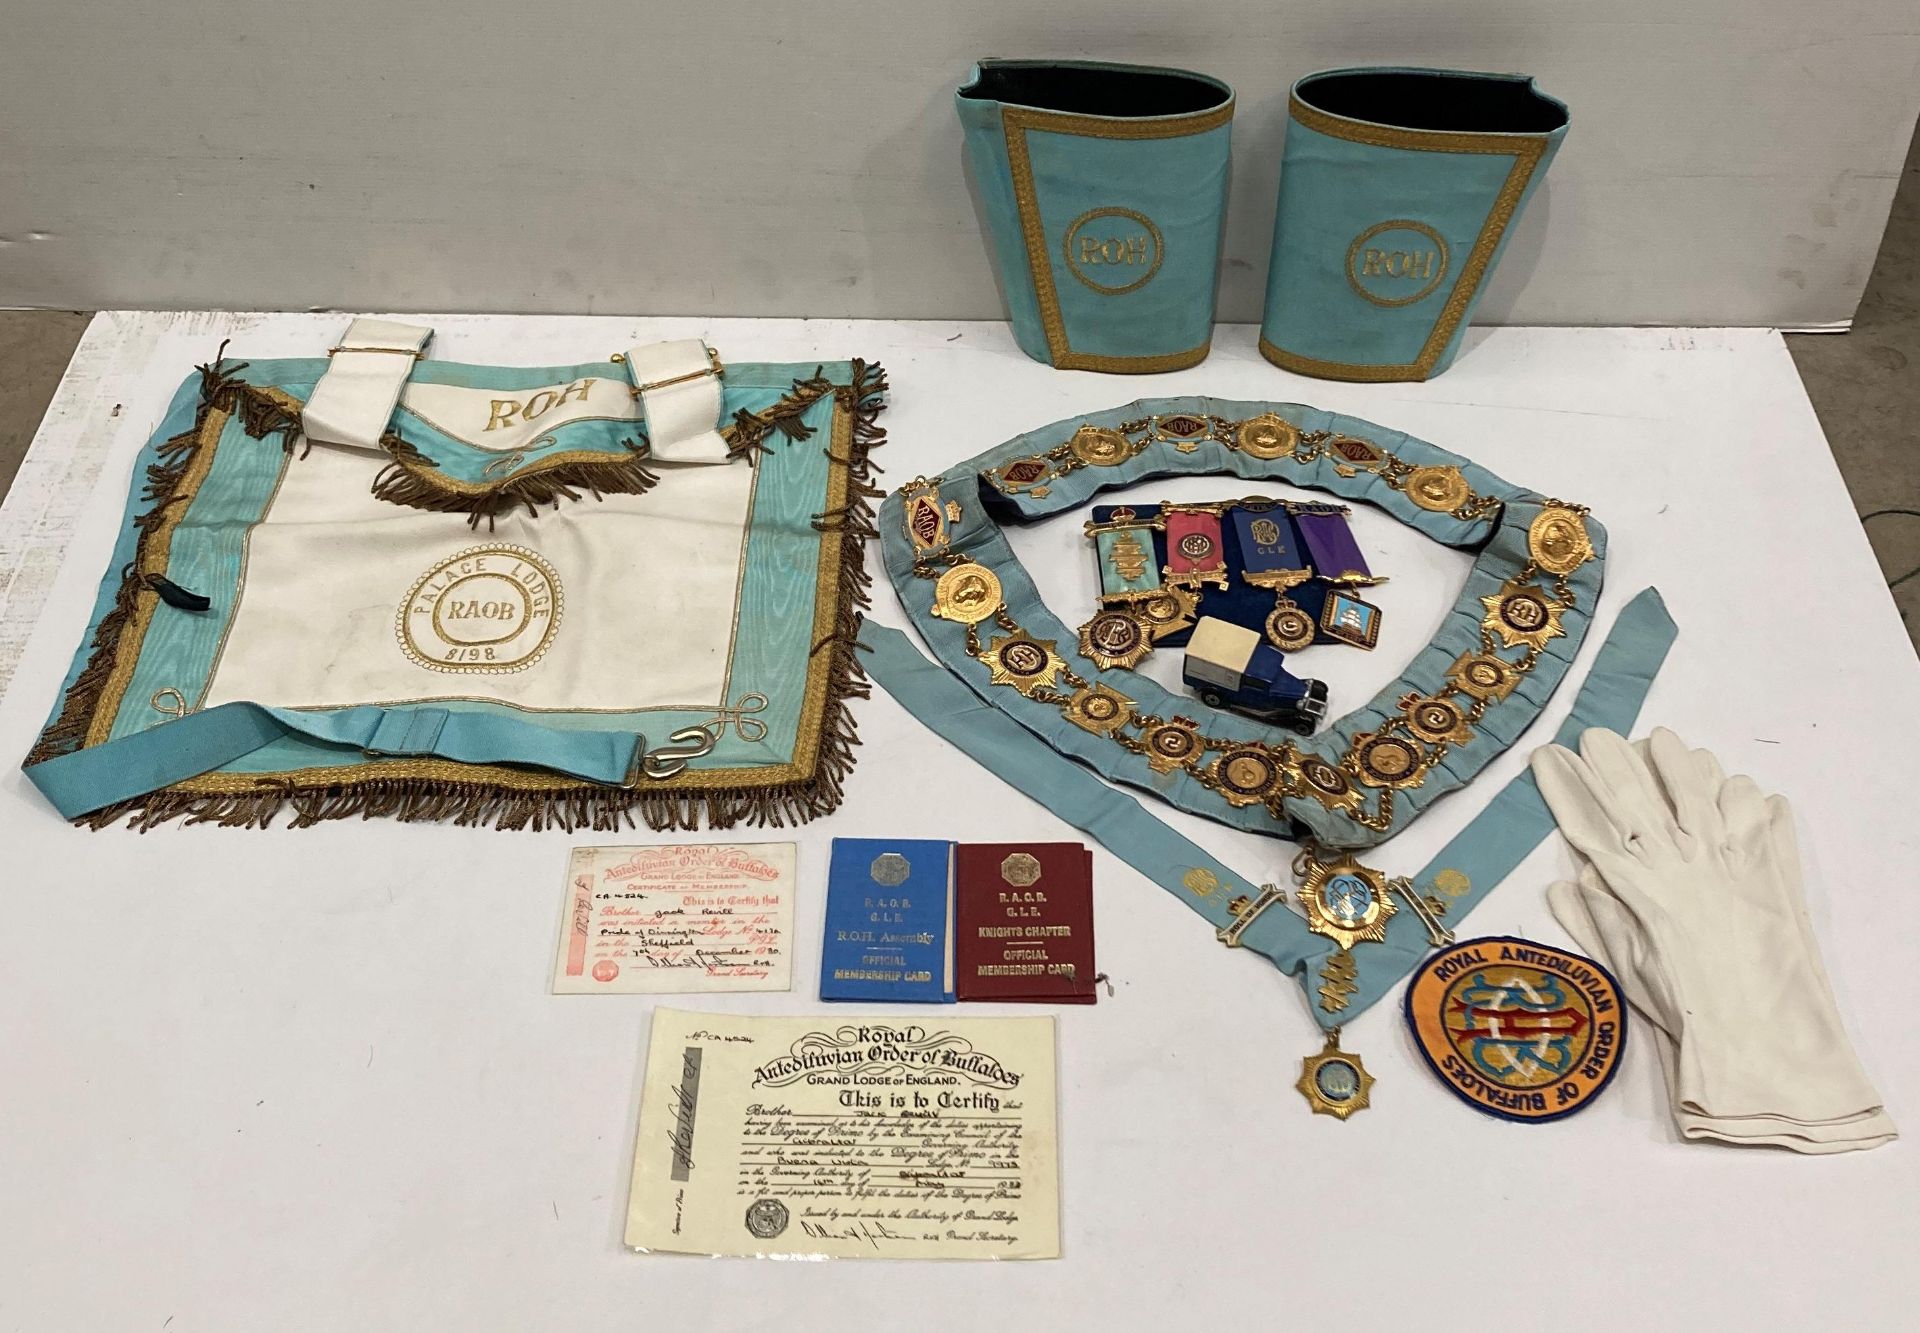 Contents to box - RAOB ceremonial sash with medals, cuffs, gloves, certificates,